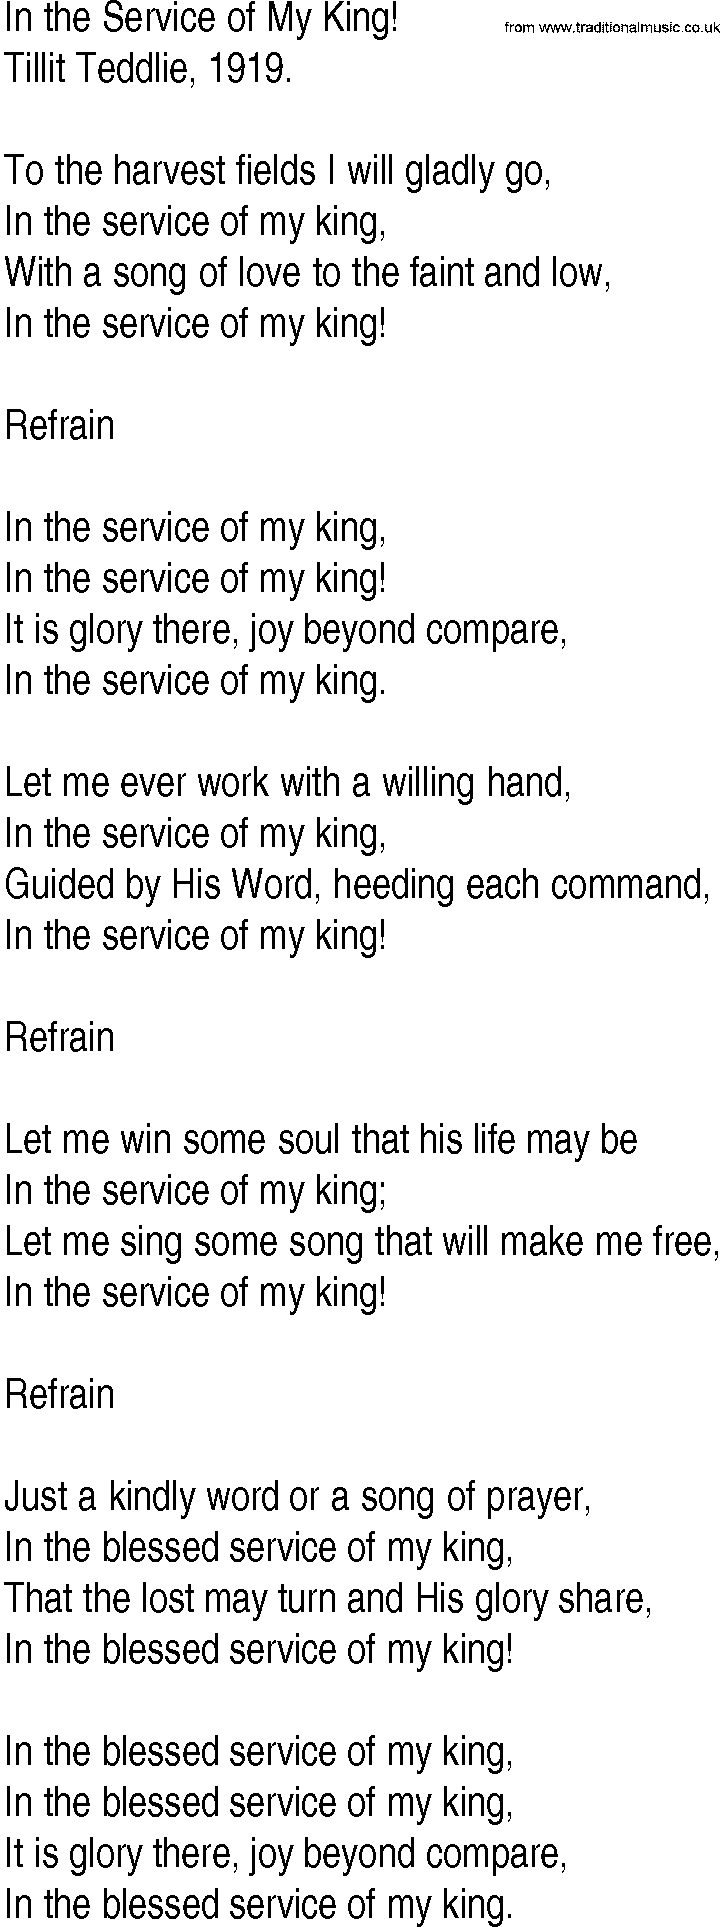 Hymn and Gospel Song: In the Service of My King! by Tillit Teddlie lyrics